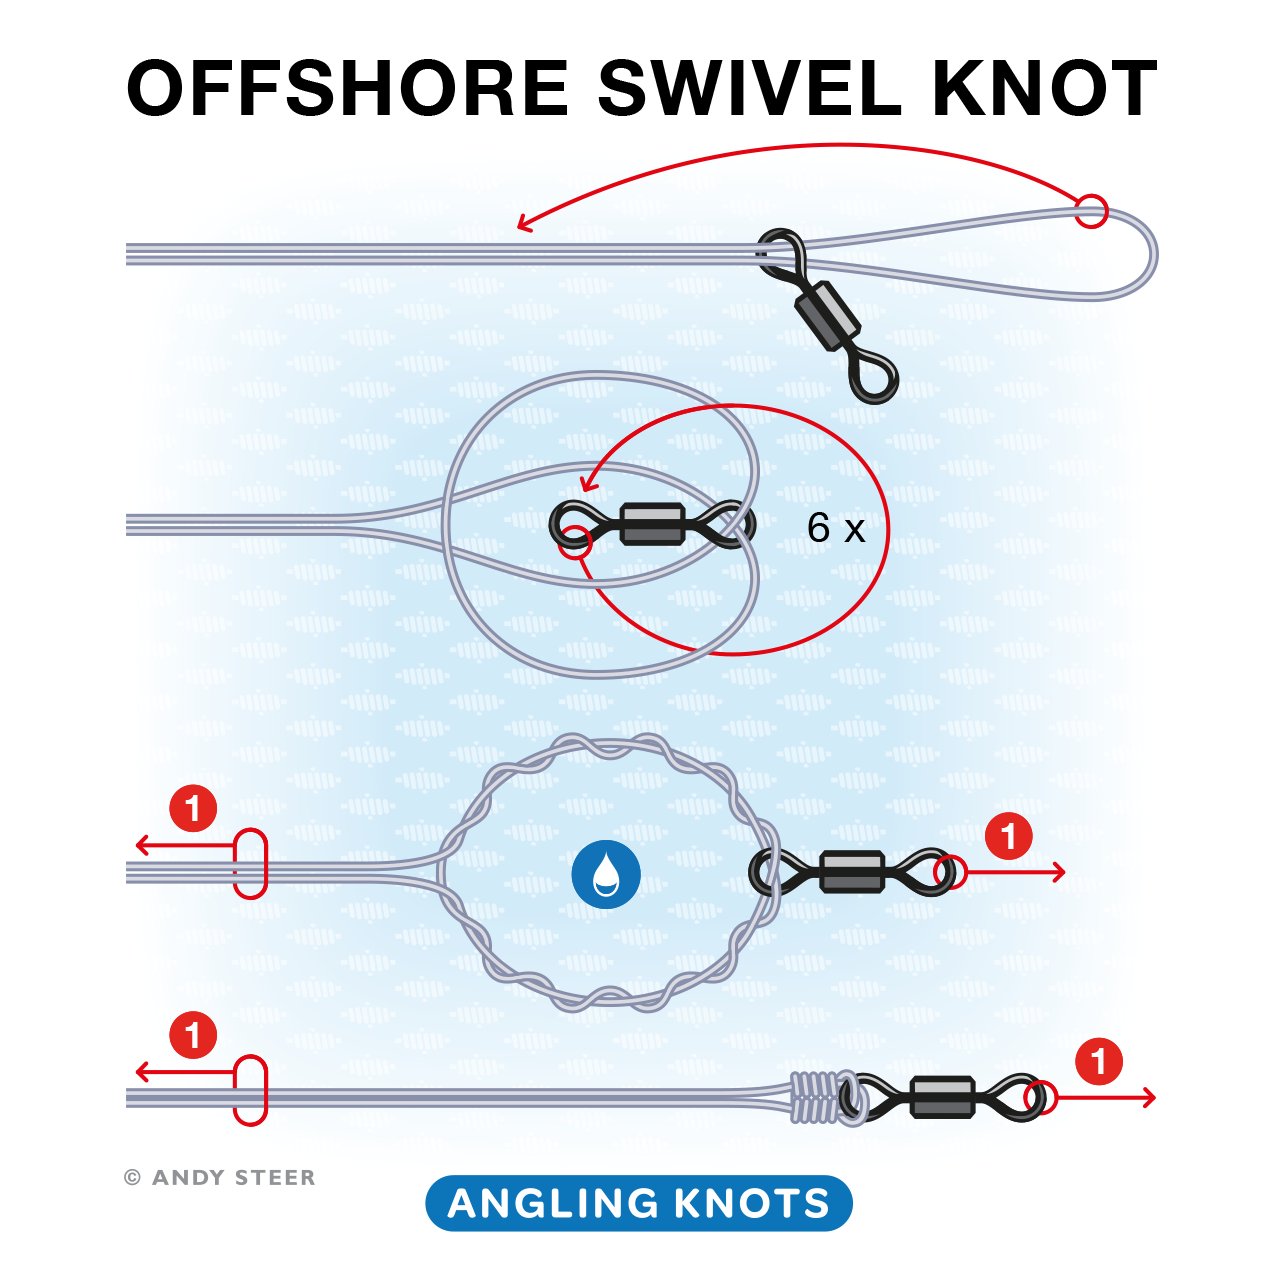 Andy Steer on X: The offshore swivel knot is used to connect a swivel to a  double line. 3 loops for > 50 lb line, 4 loops for 30 lb - 50